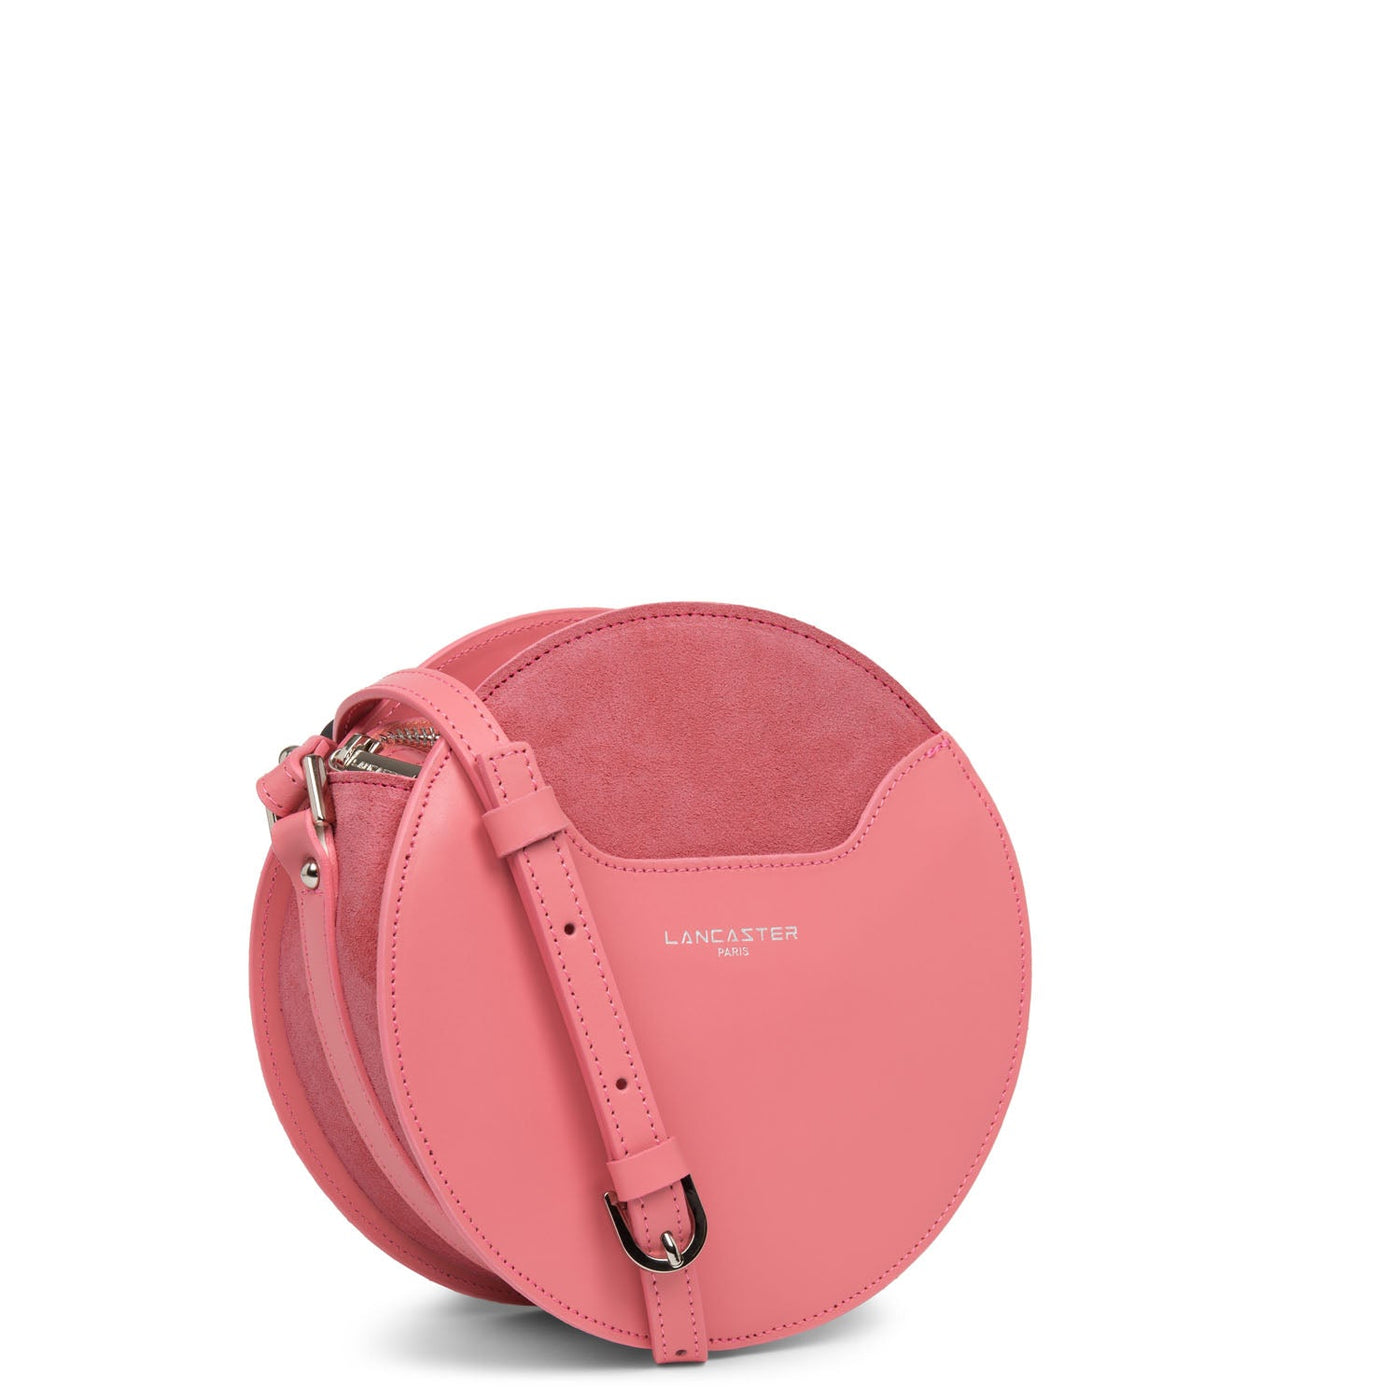 round bag - smooth lune #couleur_rose-blush